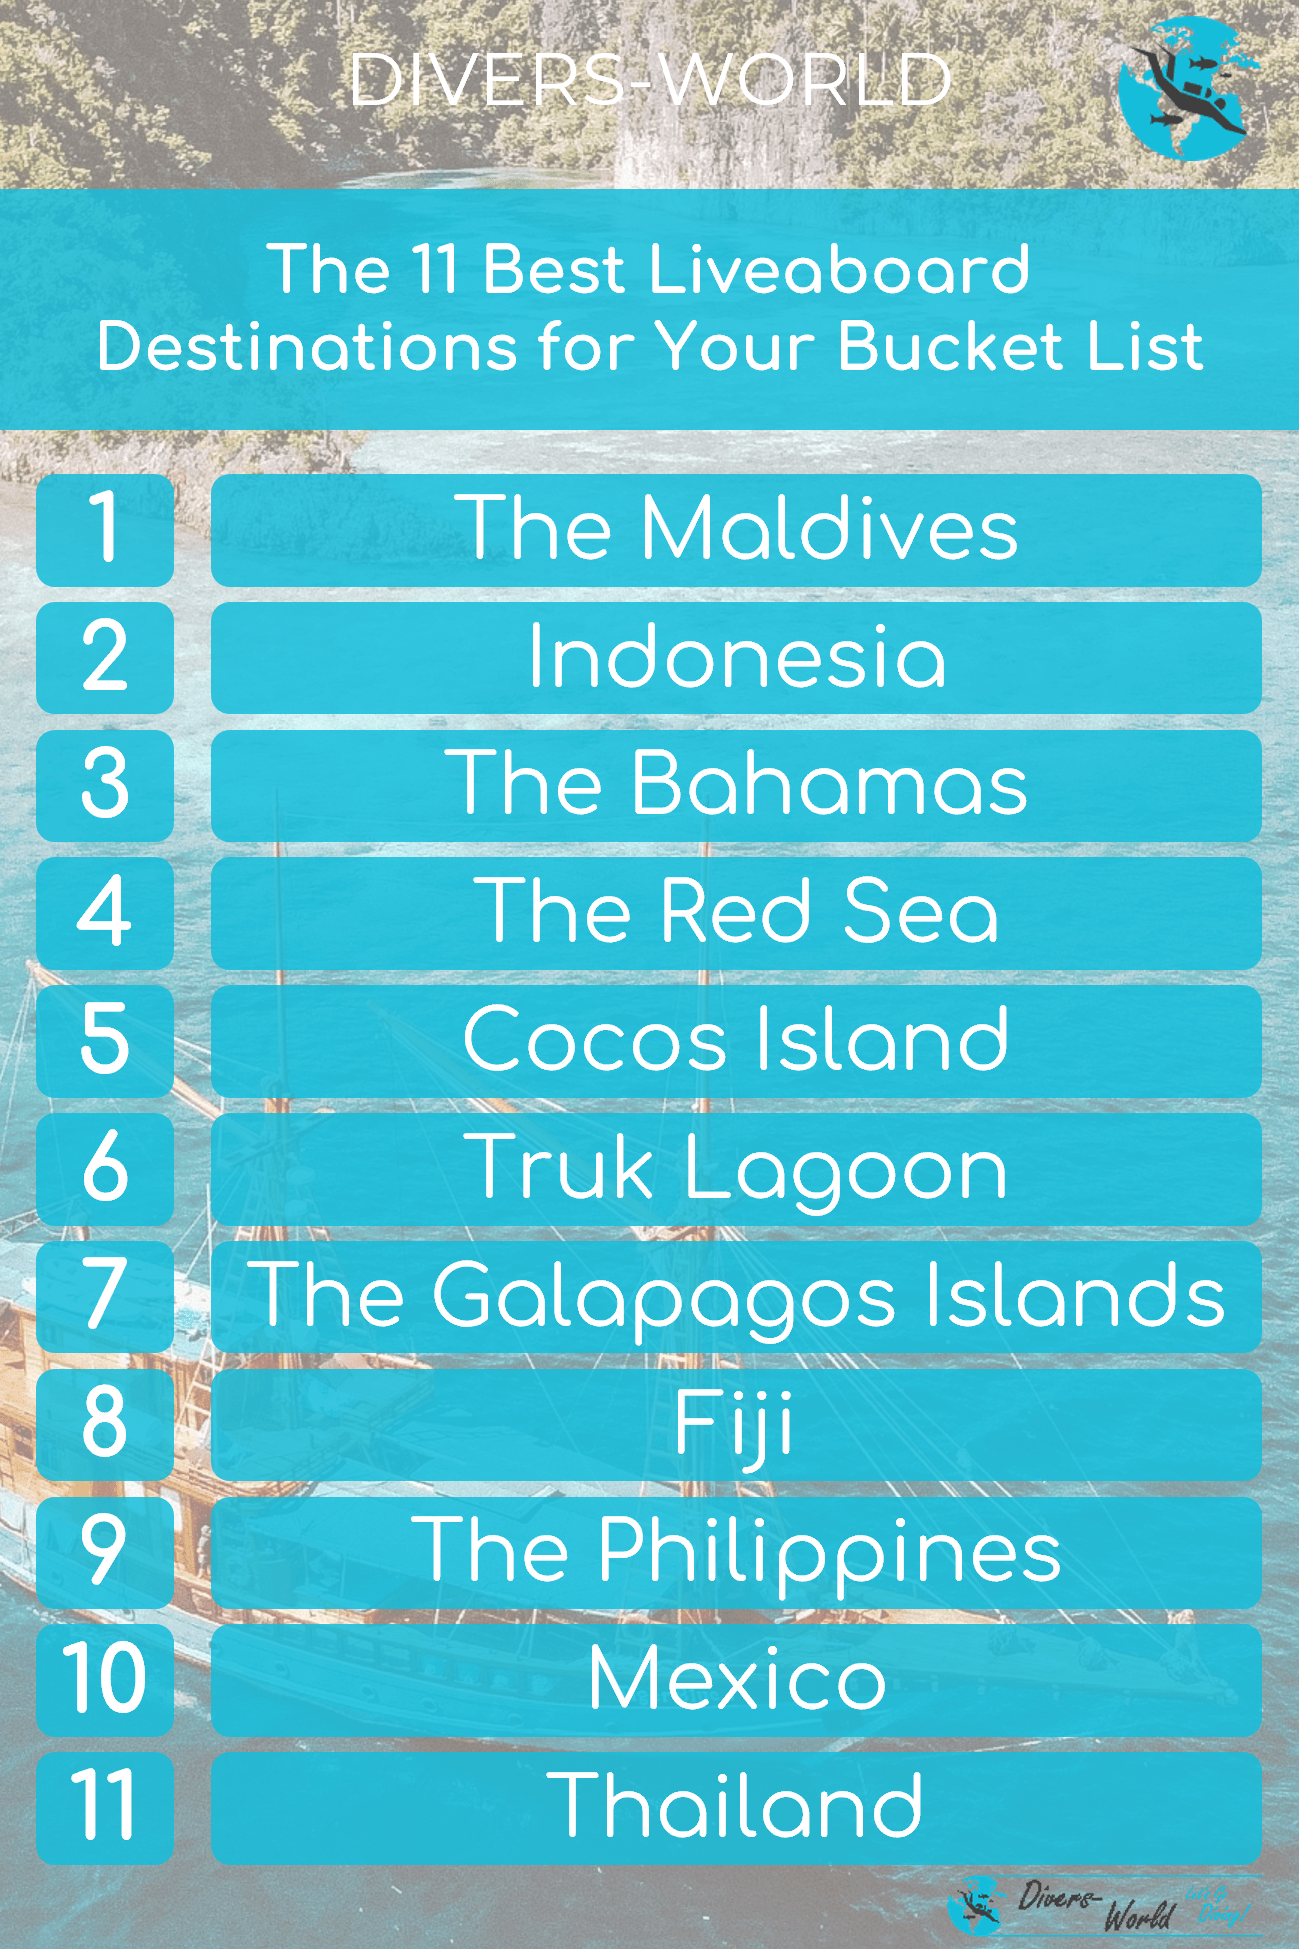 The 11 Best Liveaboard Destinations for Your Bucket List